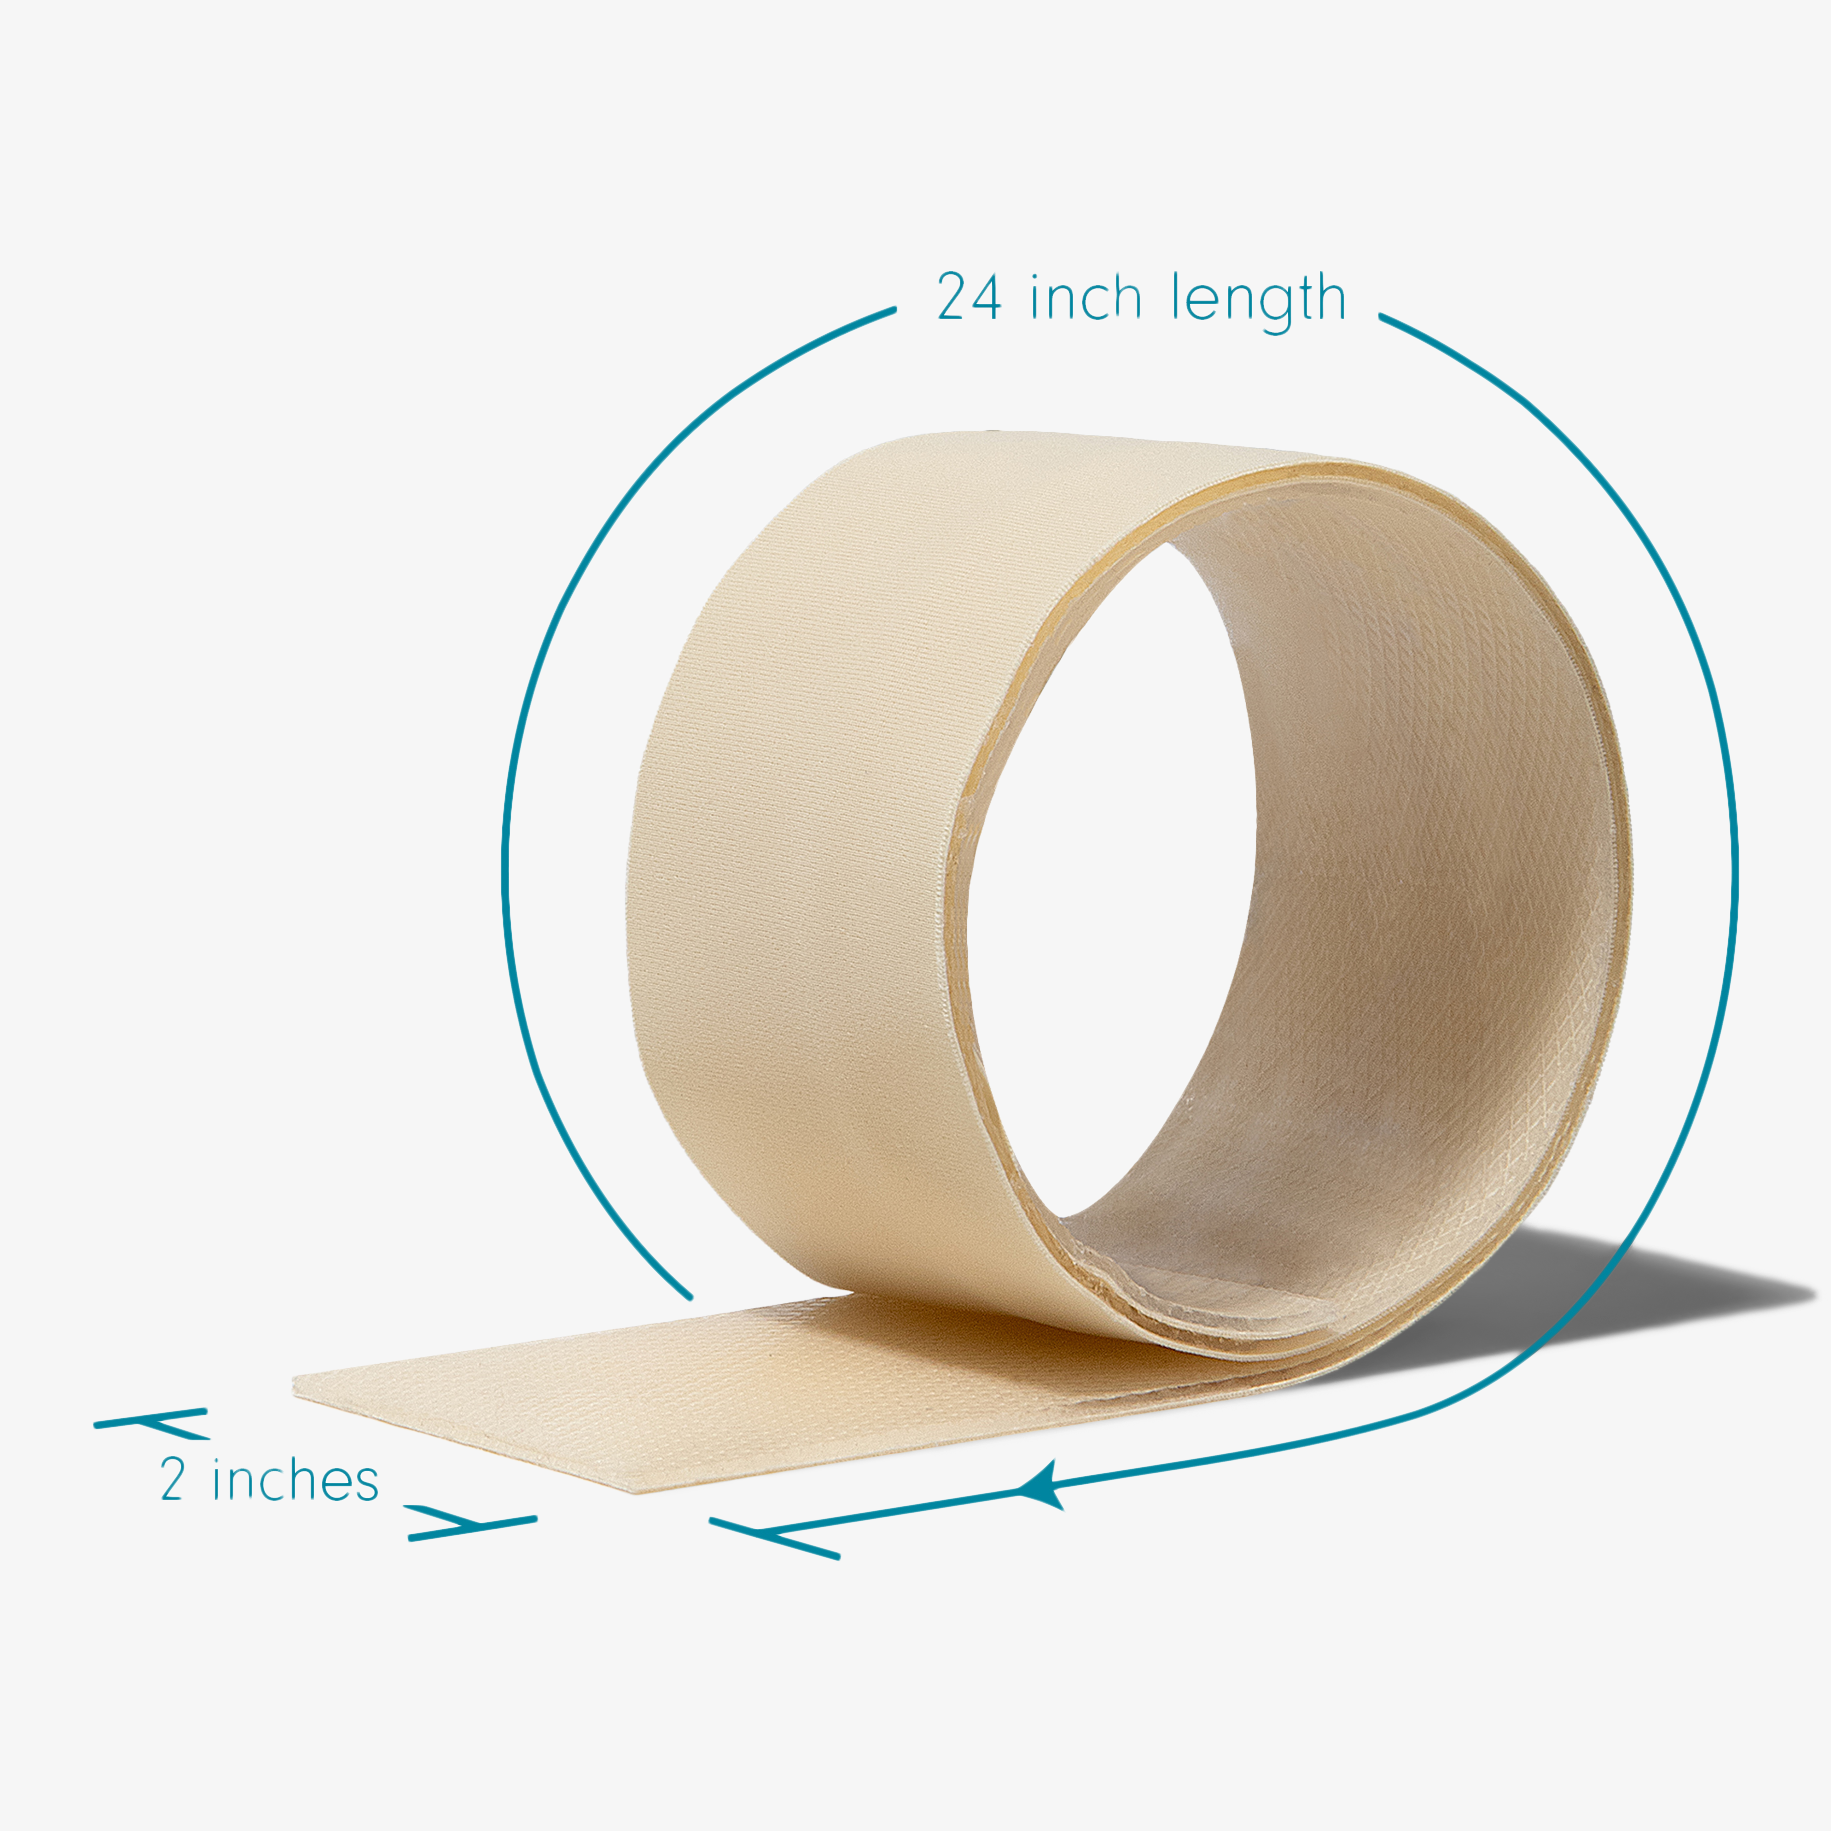 Medical Silicone Tape,Silicone Roll ,Silicone Roll for old and new